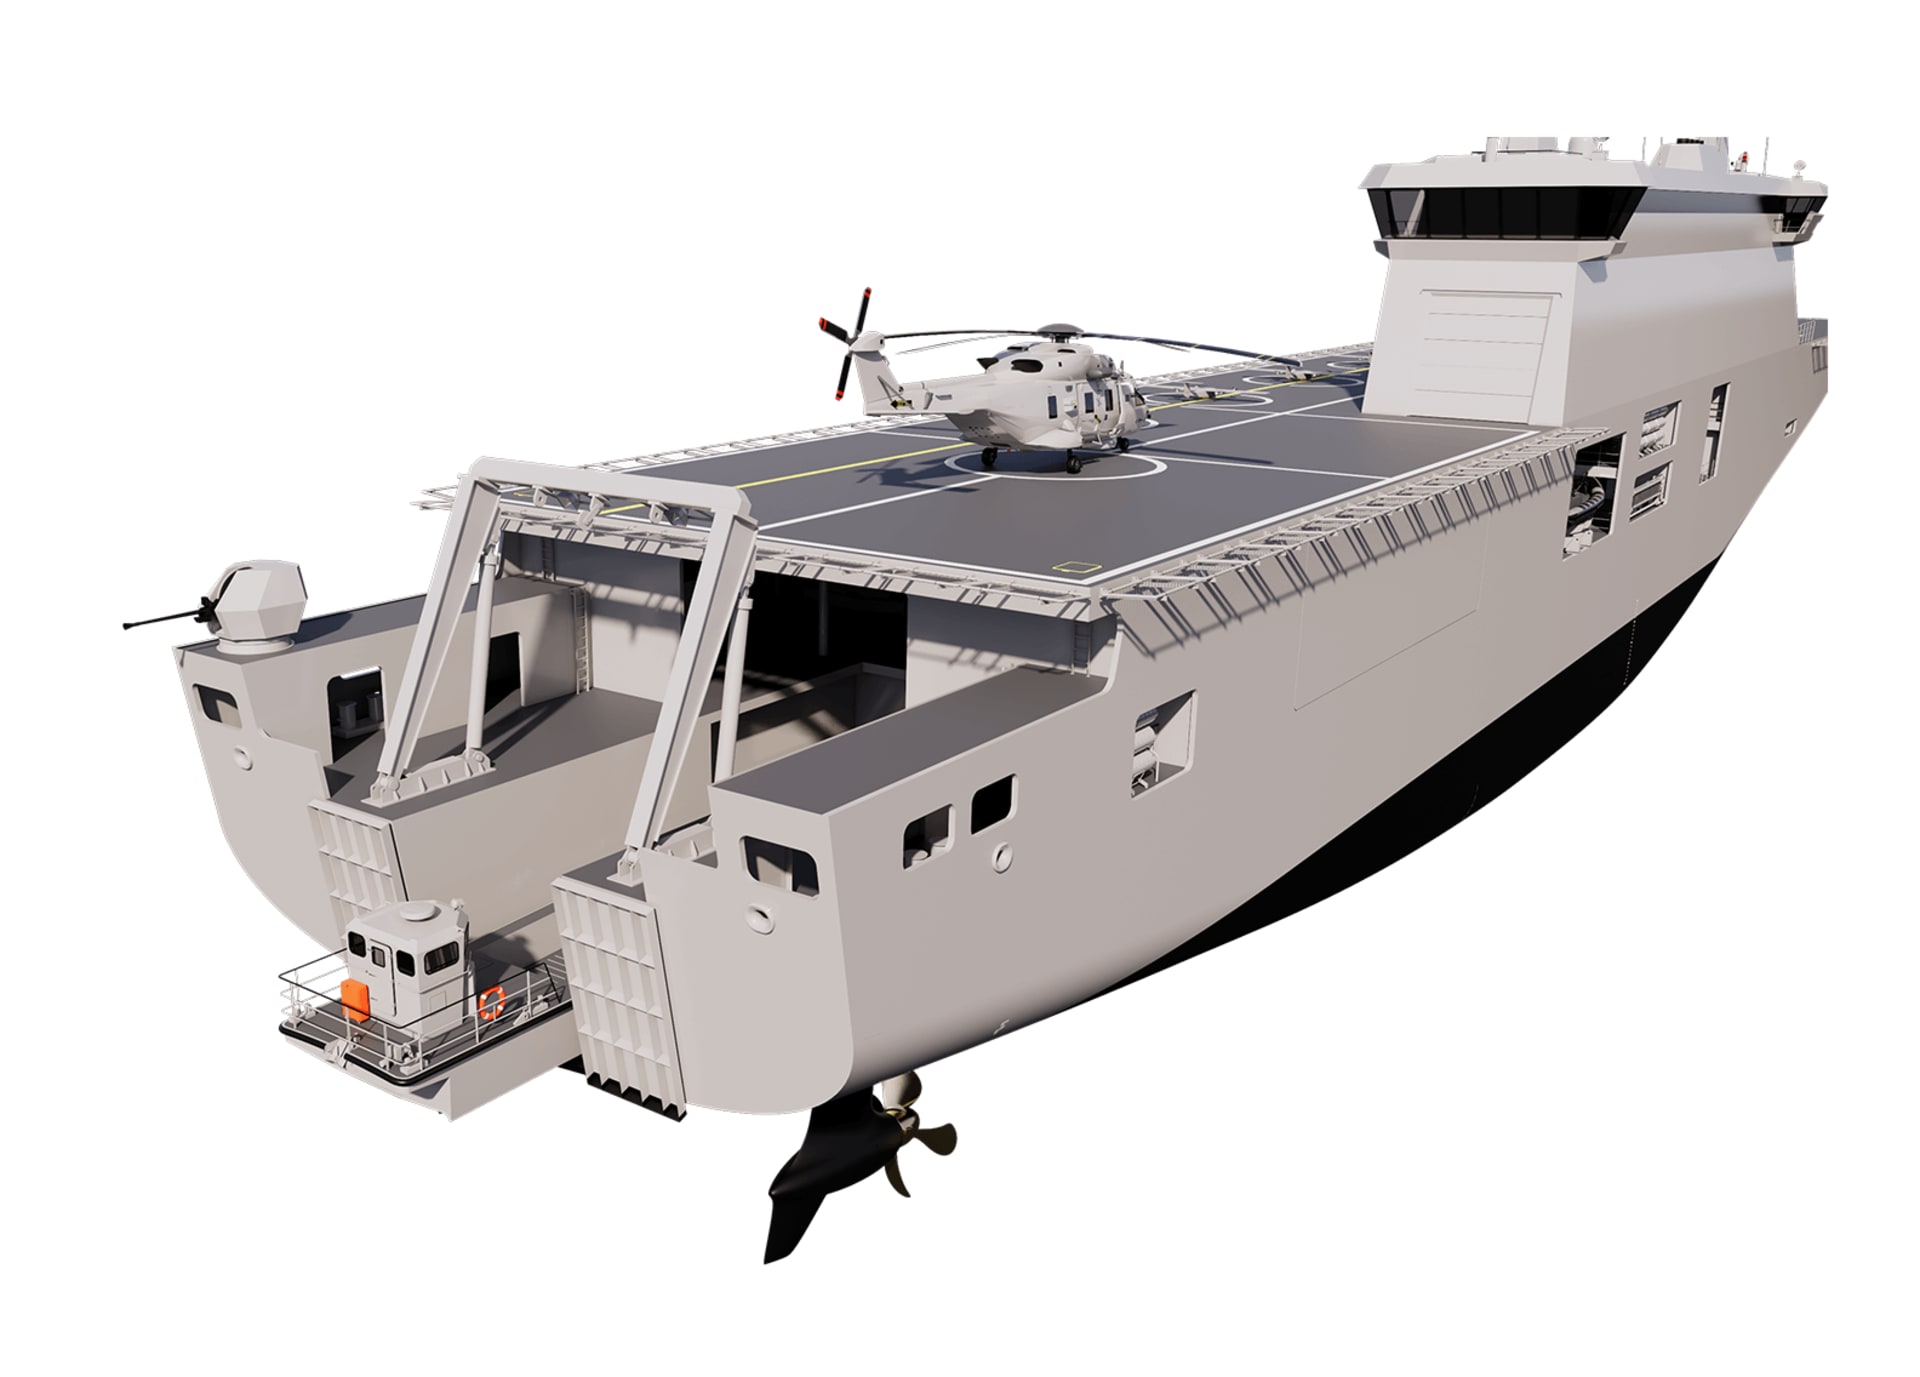 damen-unveils-new-mpss-to-meet-today-s-defence-security-challenges-04